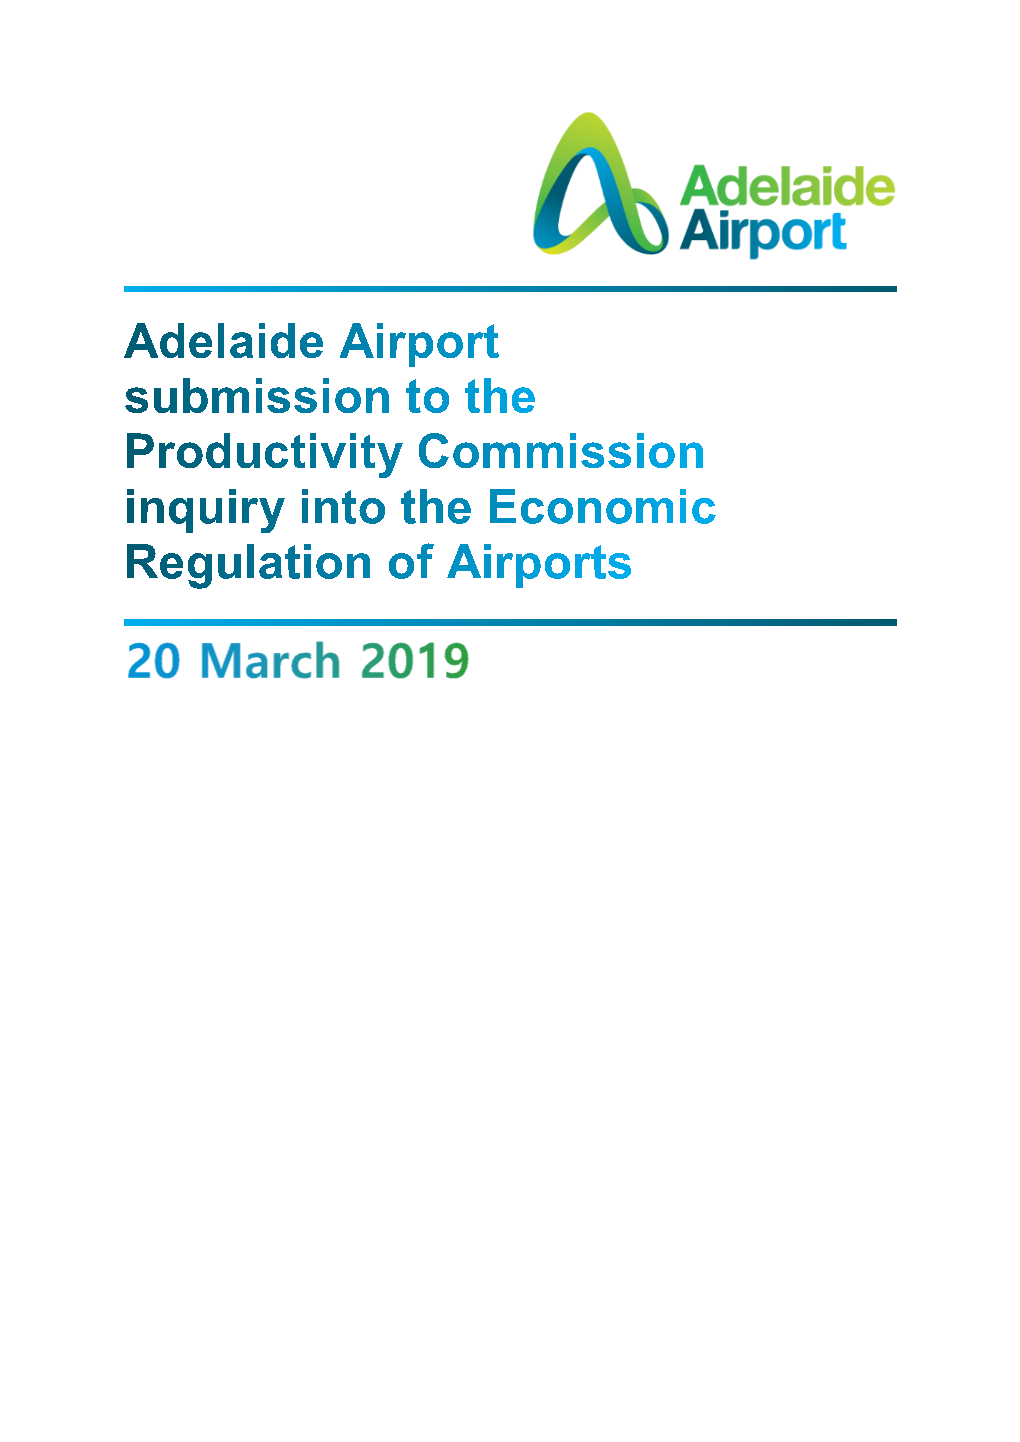 Adelaide Airport Limited (AAL) Is Pleased to Assist the Productivity Commission (PC) in Its Inquiry by Responding to Several of the PC’S Information Requests